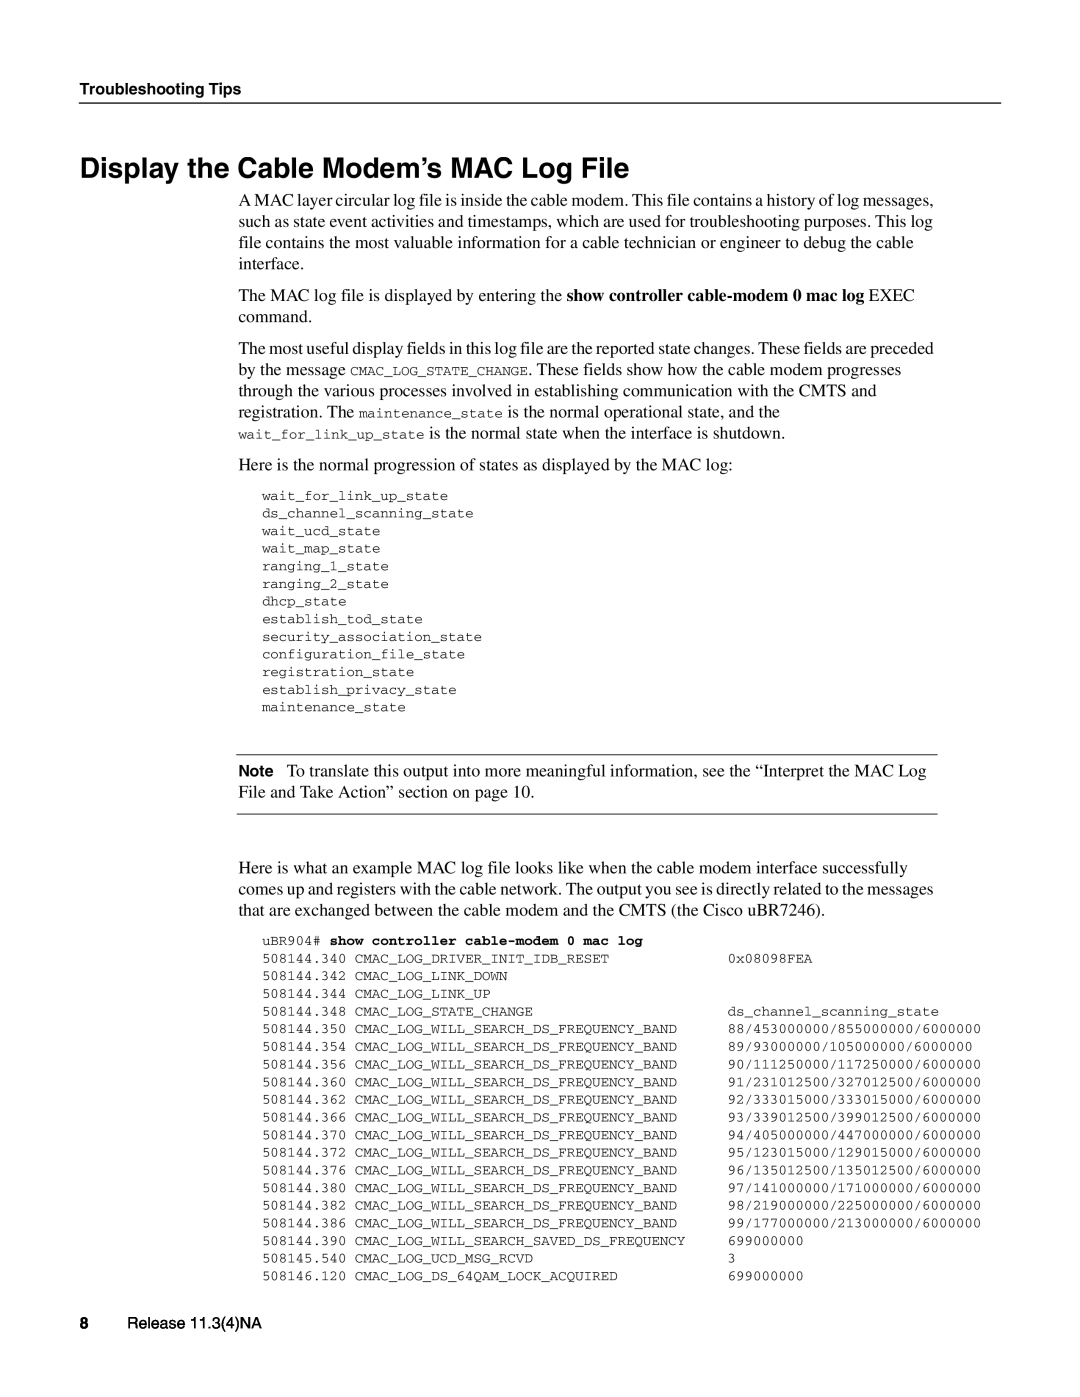 Cisco Systems UBR904 manual Display the Cable Modem’s MAC Log File 